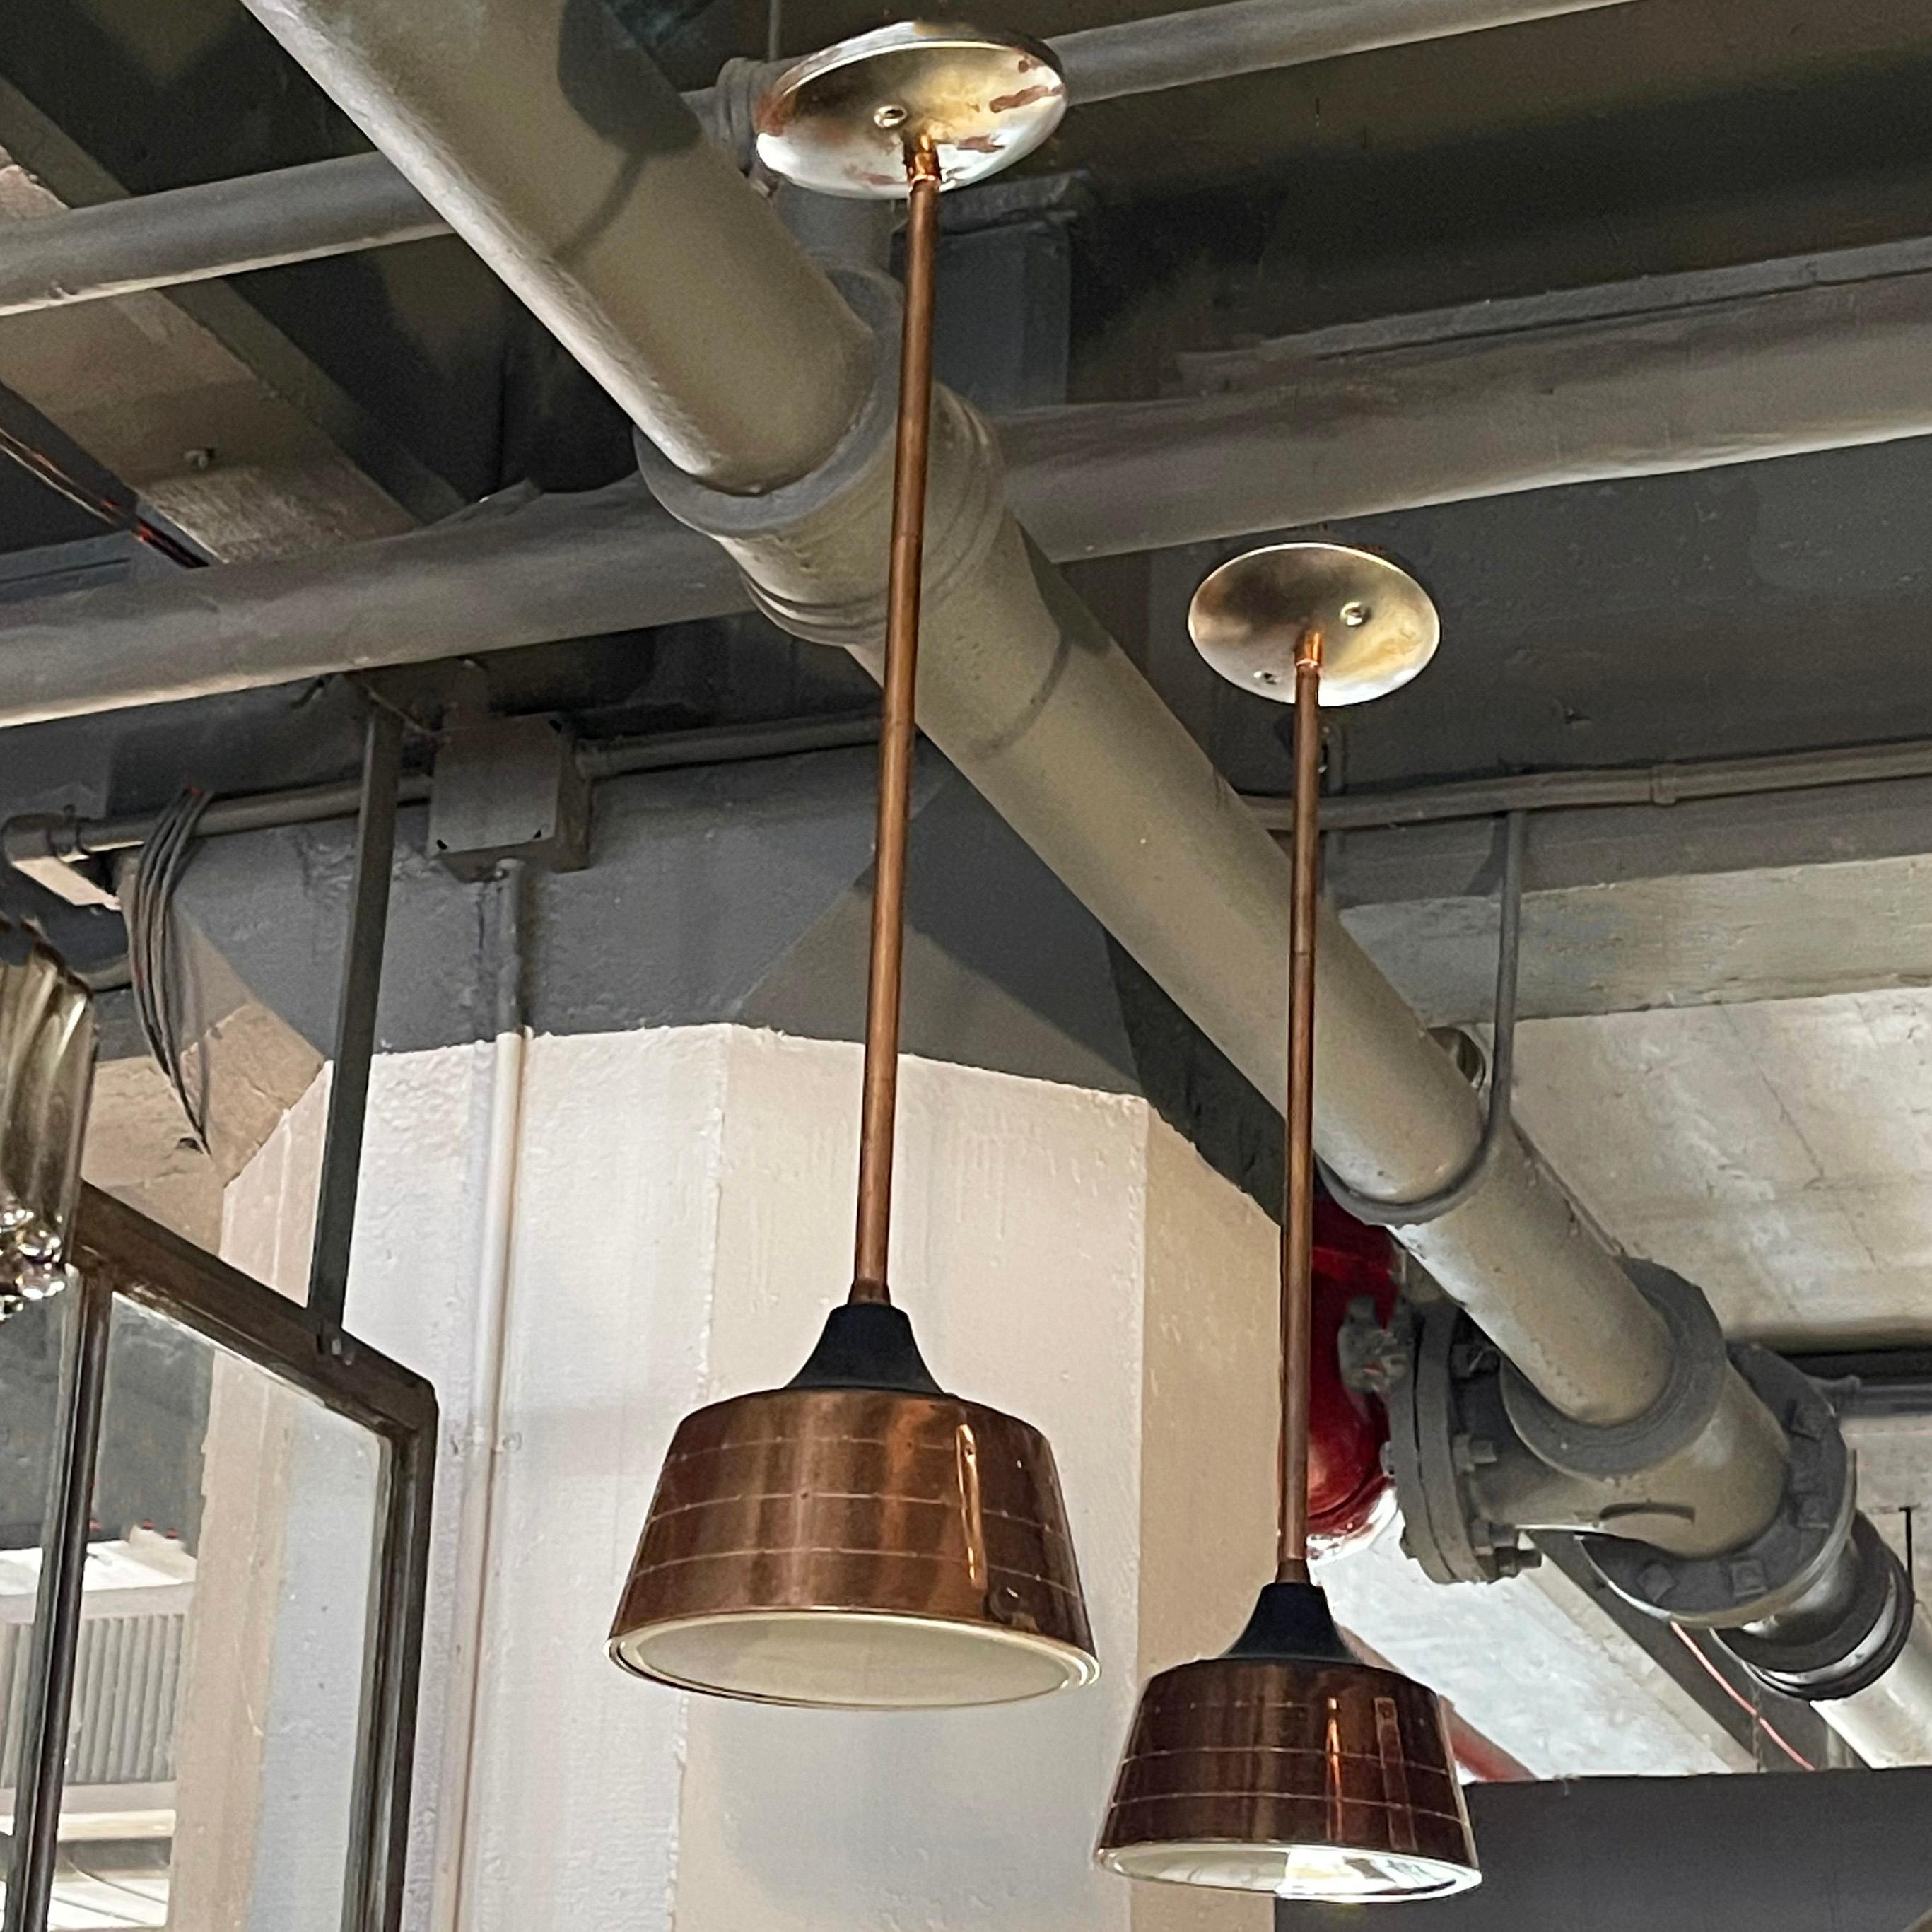 Pair of Mid-Century Modern, pendant lights by Lightolier feature 5 inch height, perforated, spun aluminum shades on poles with glass diffusers. Canopies shown are included. The pendants are newly wired to accept up to a 75 watt, medium socket bulb